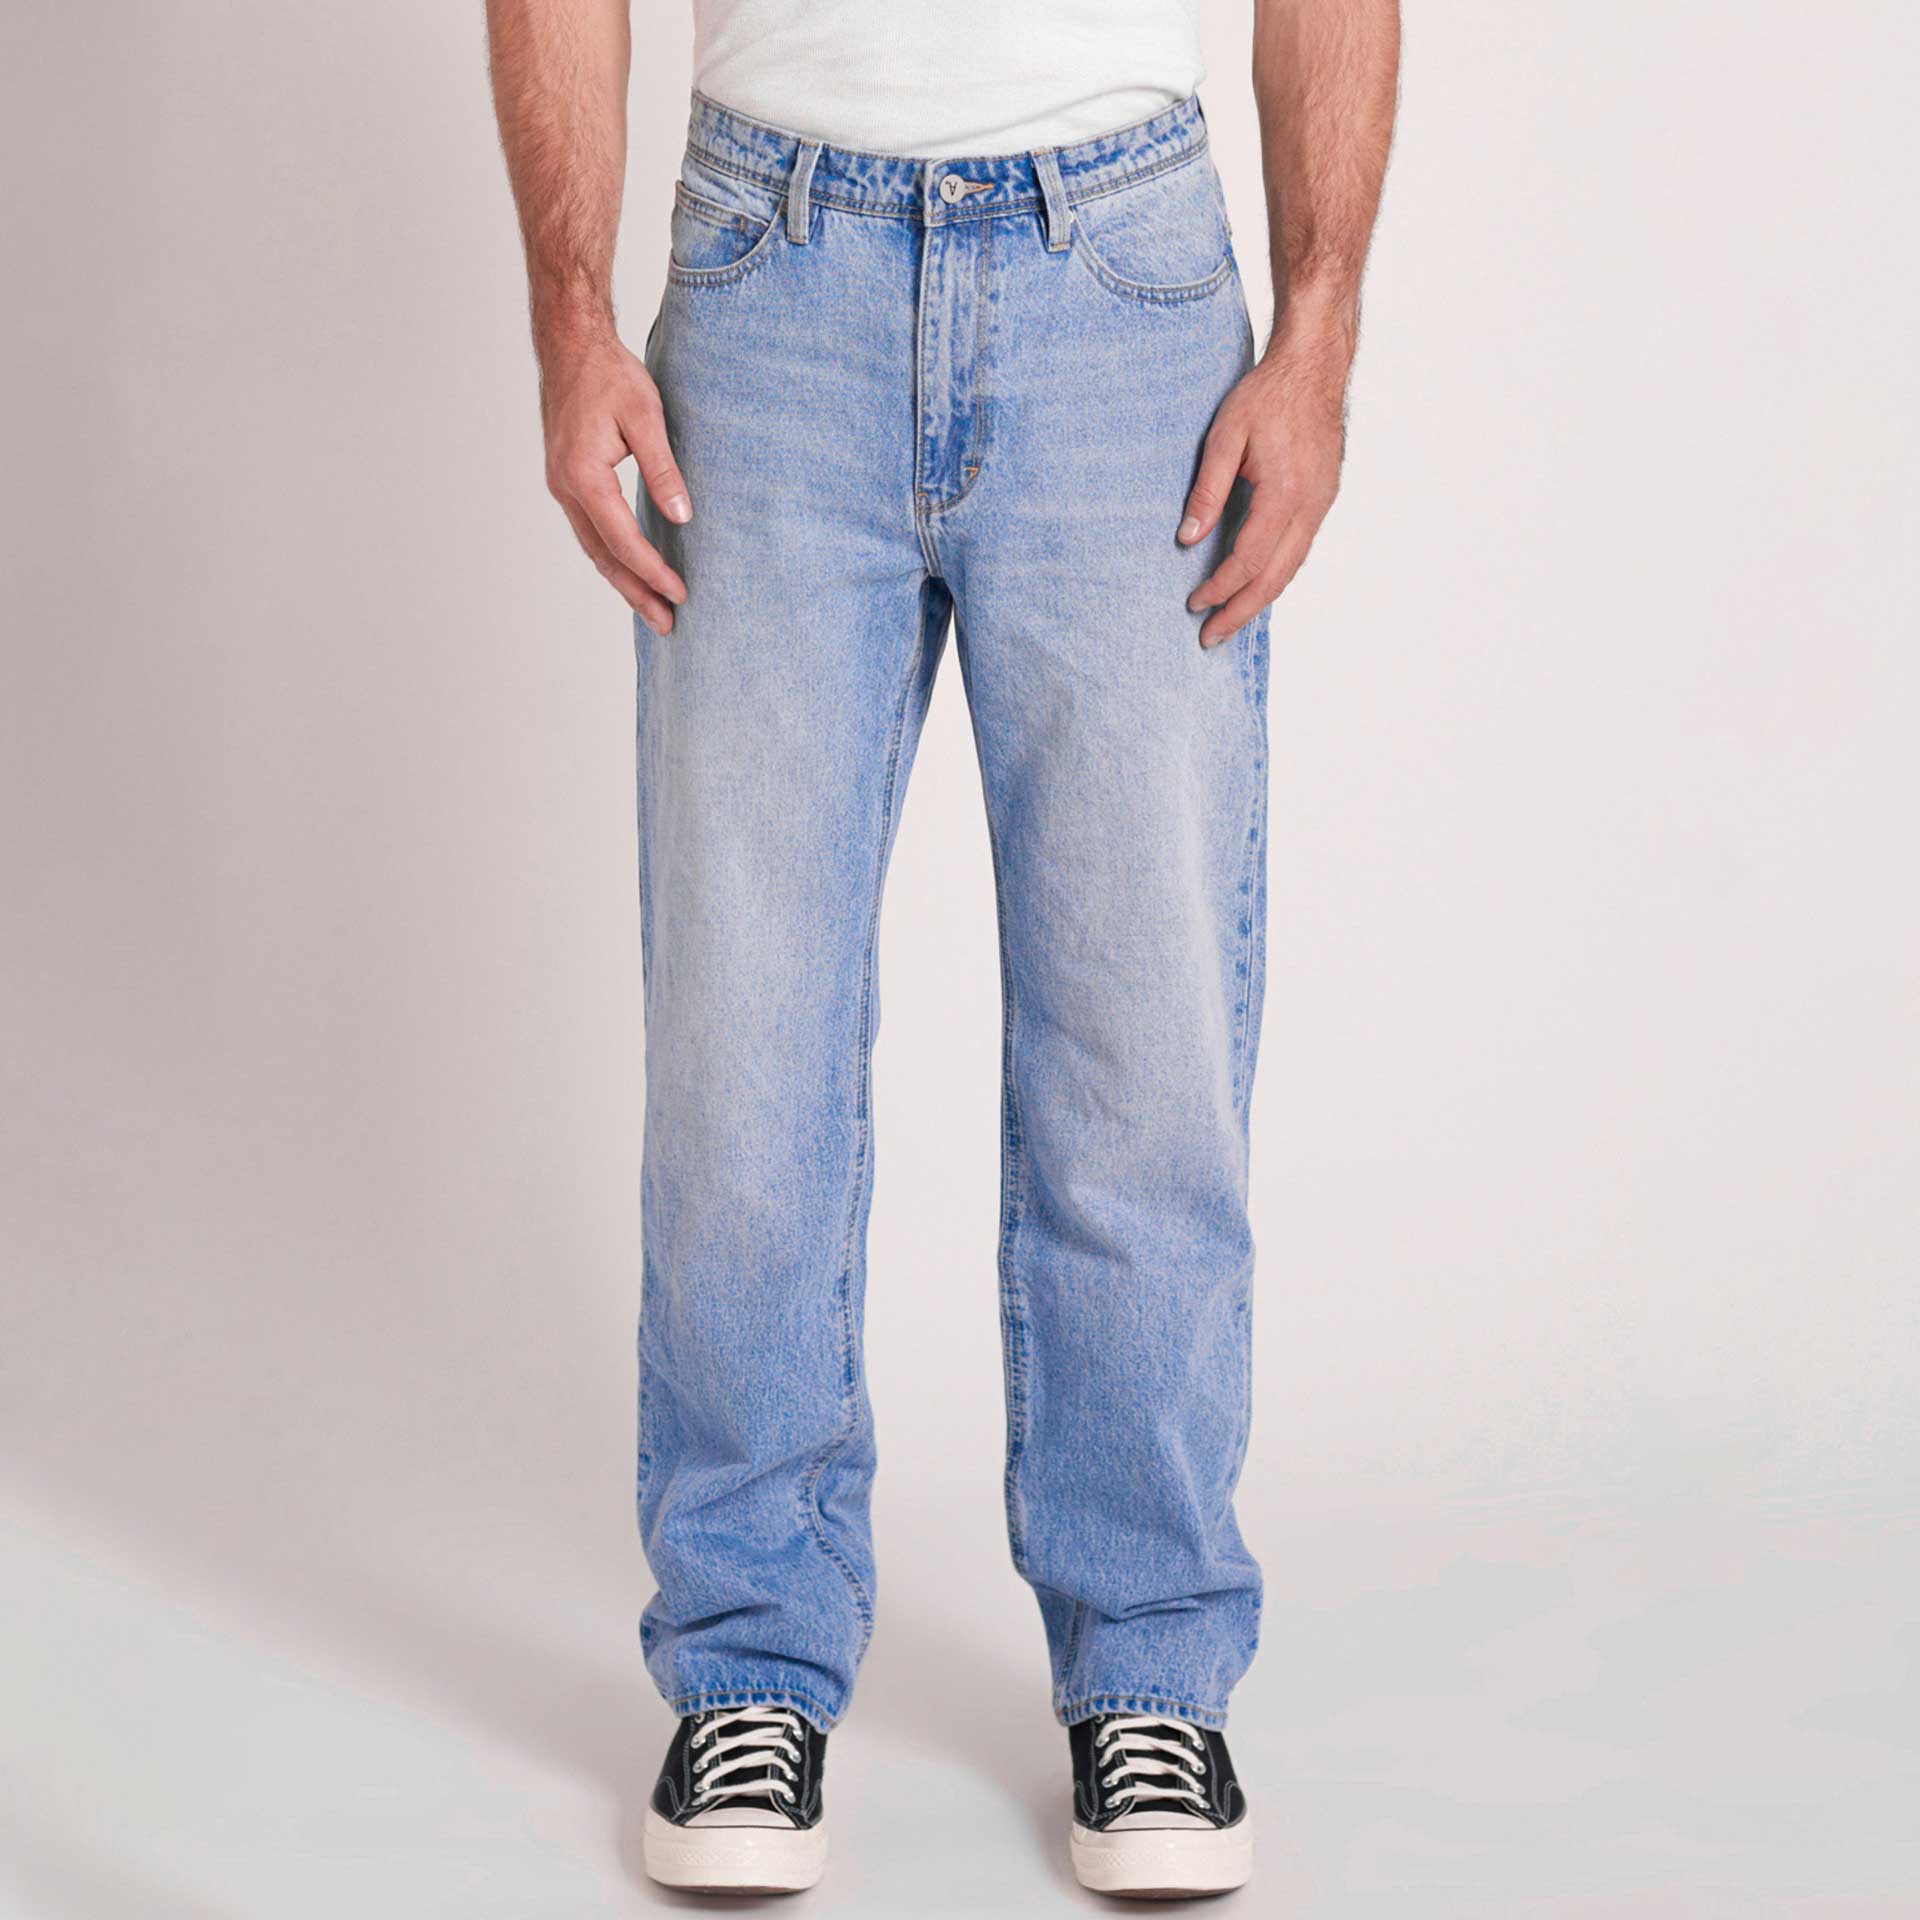 Abrand Jeans Baggy nevermind 1